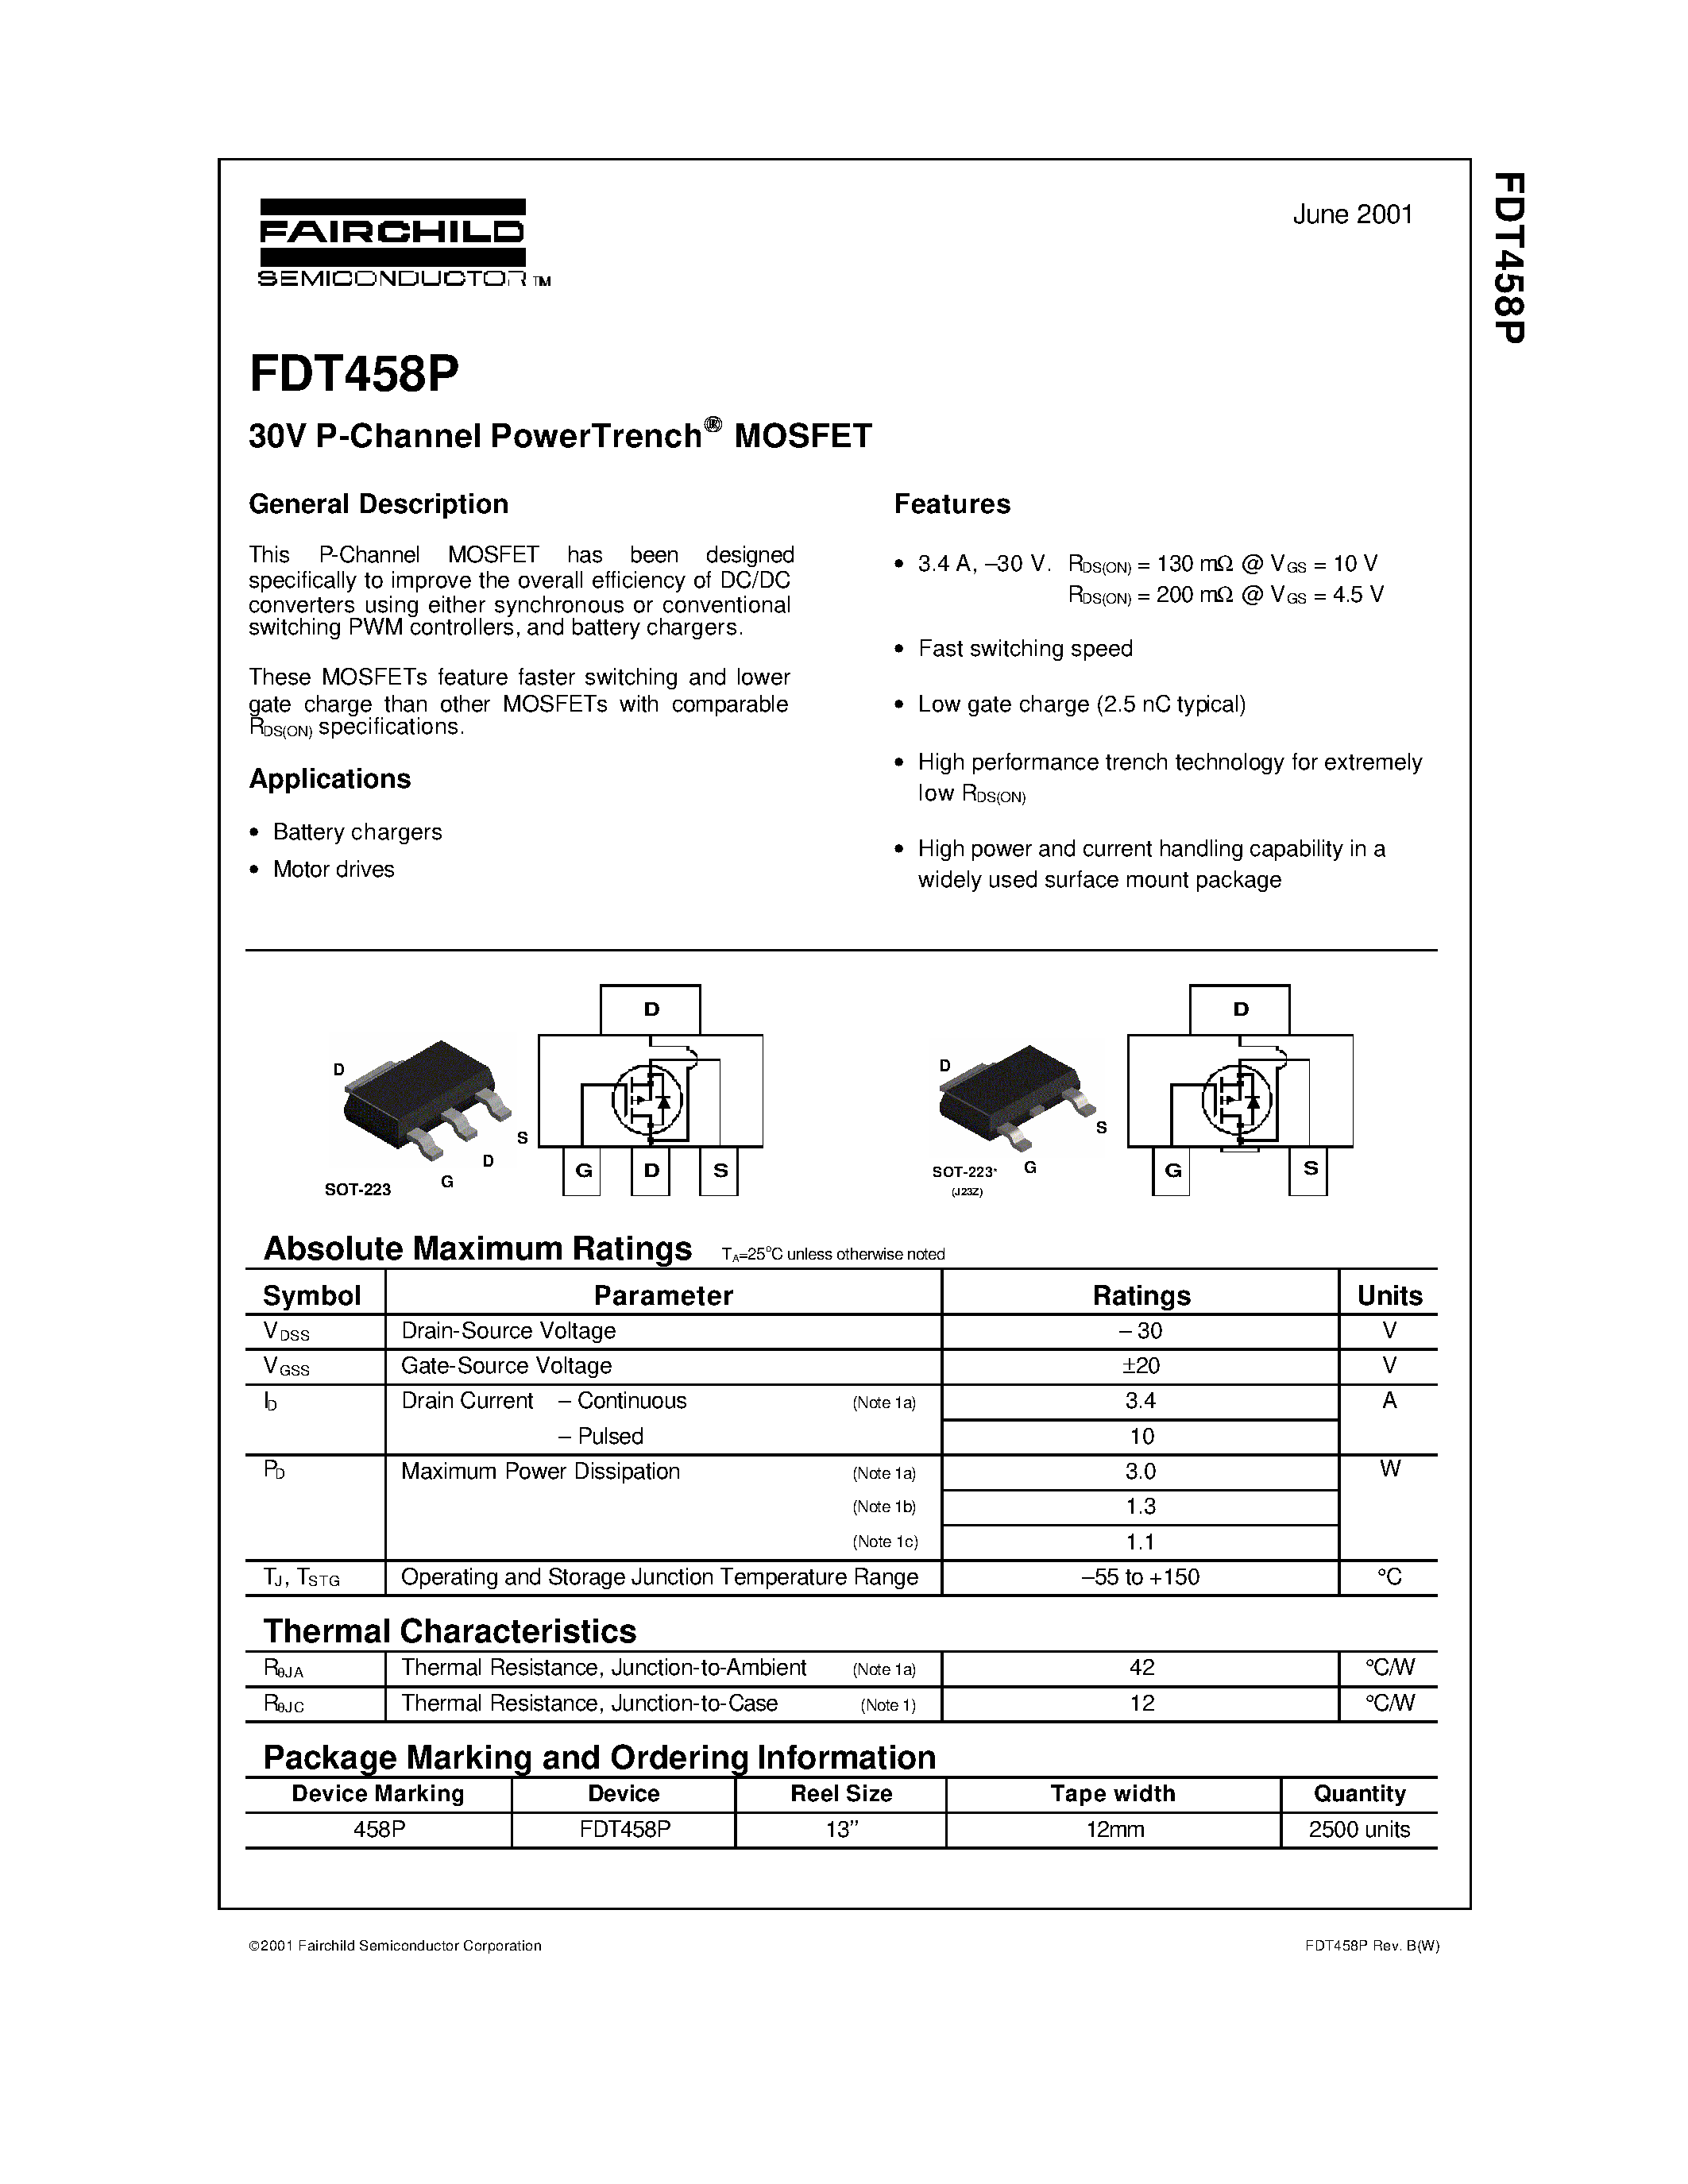 Даташит FDT458P - 30V P-Channel PowerTrench MOSFET страница 1